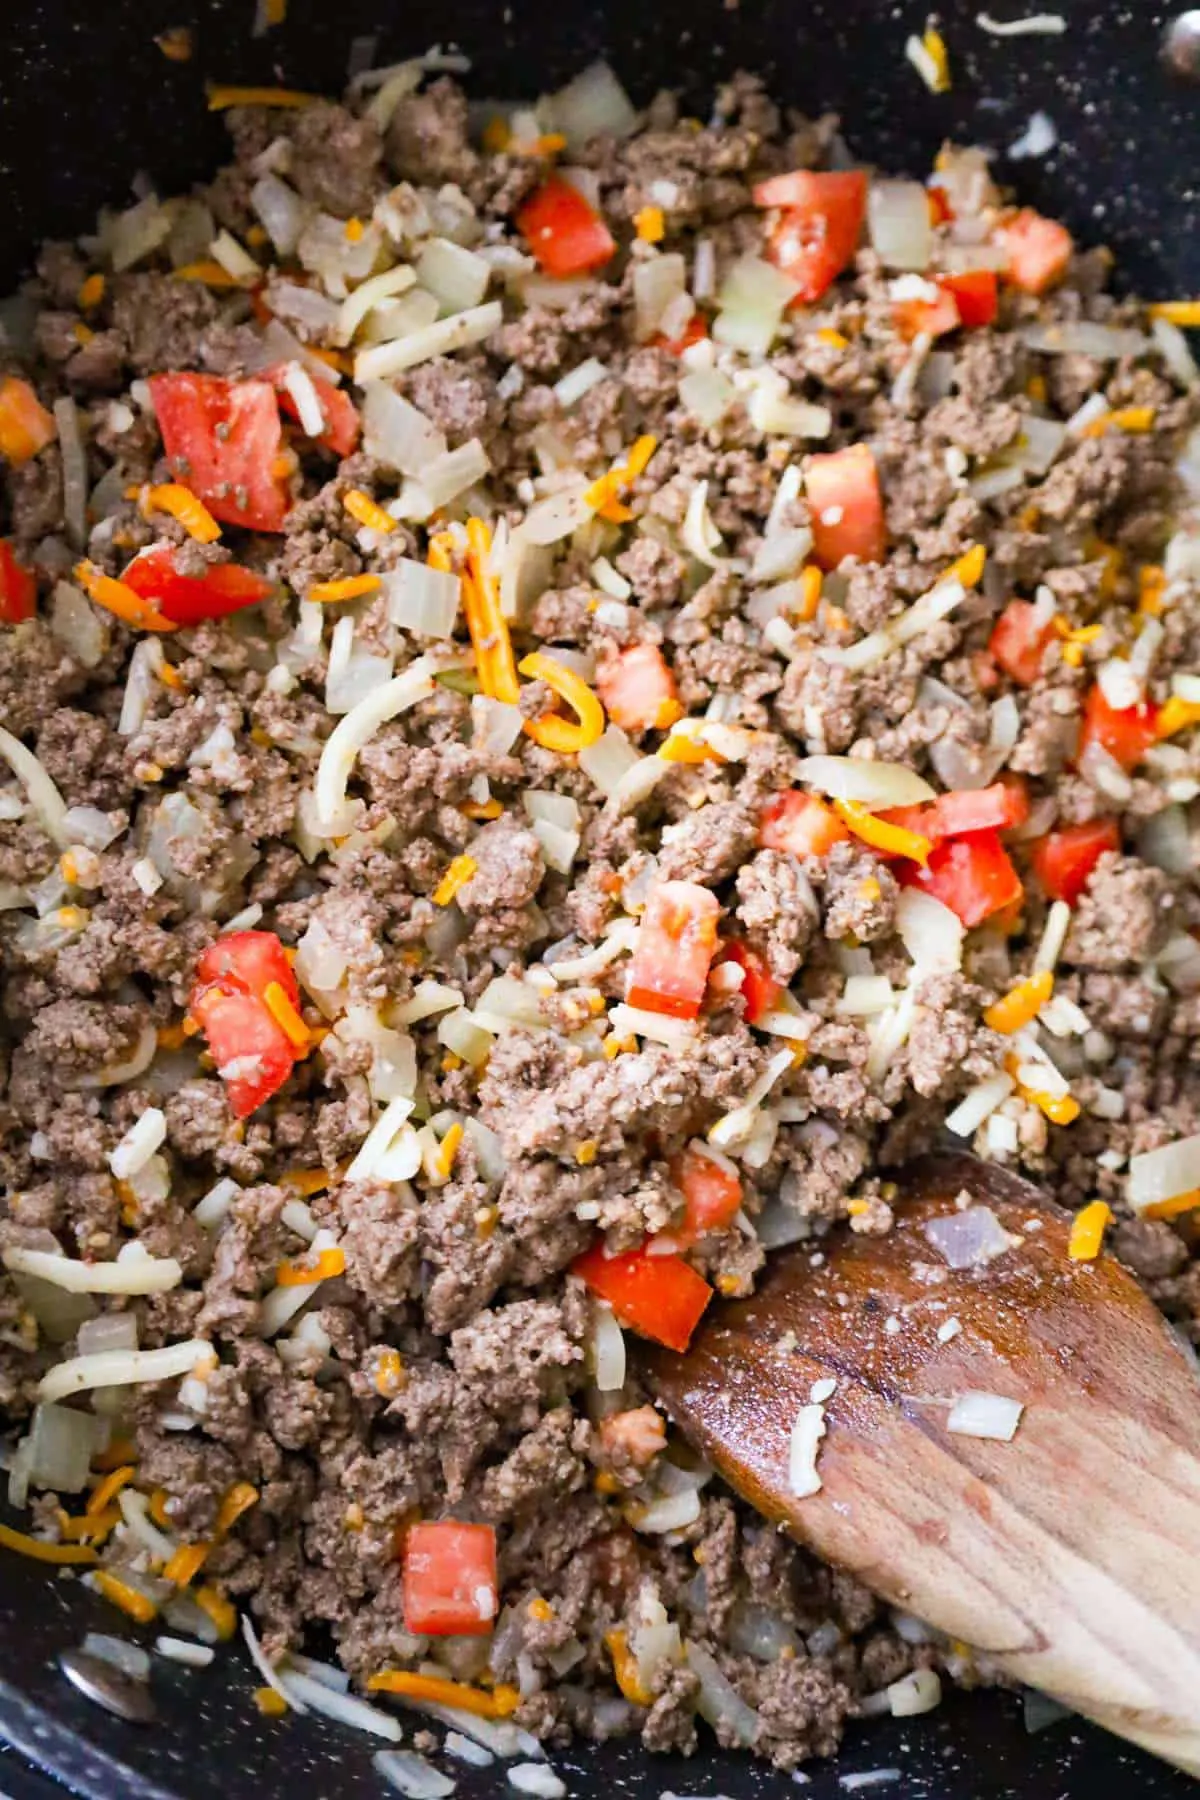 diced tomatoes, shredded cheese and cooked ground beef in a saute pan